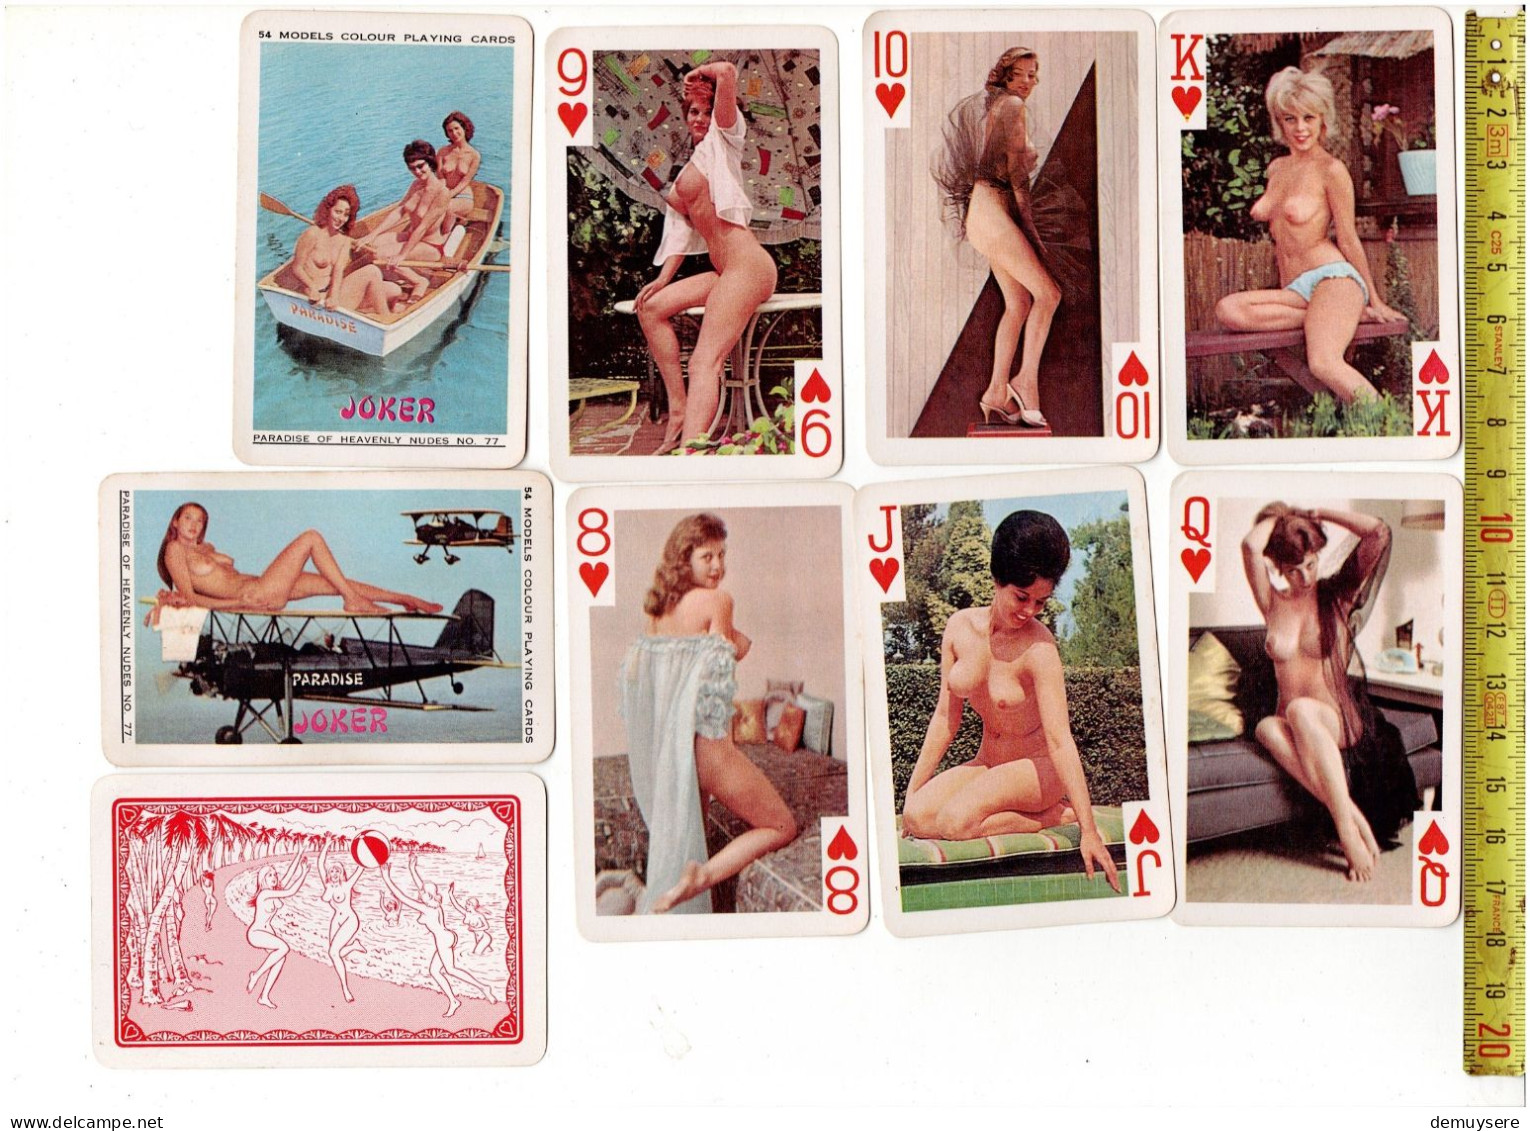 54 MODELS COLOUR PLAYING CARDS - PARADISE OF HEAVENLY NUDES NO 77 - Playing Cards (classic)